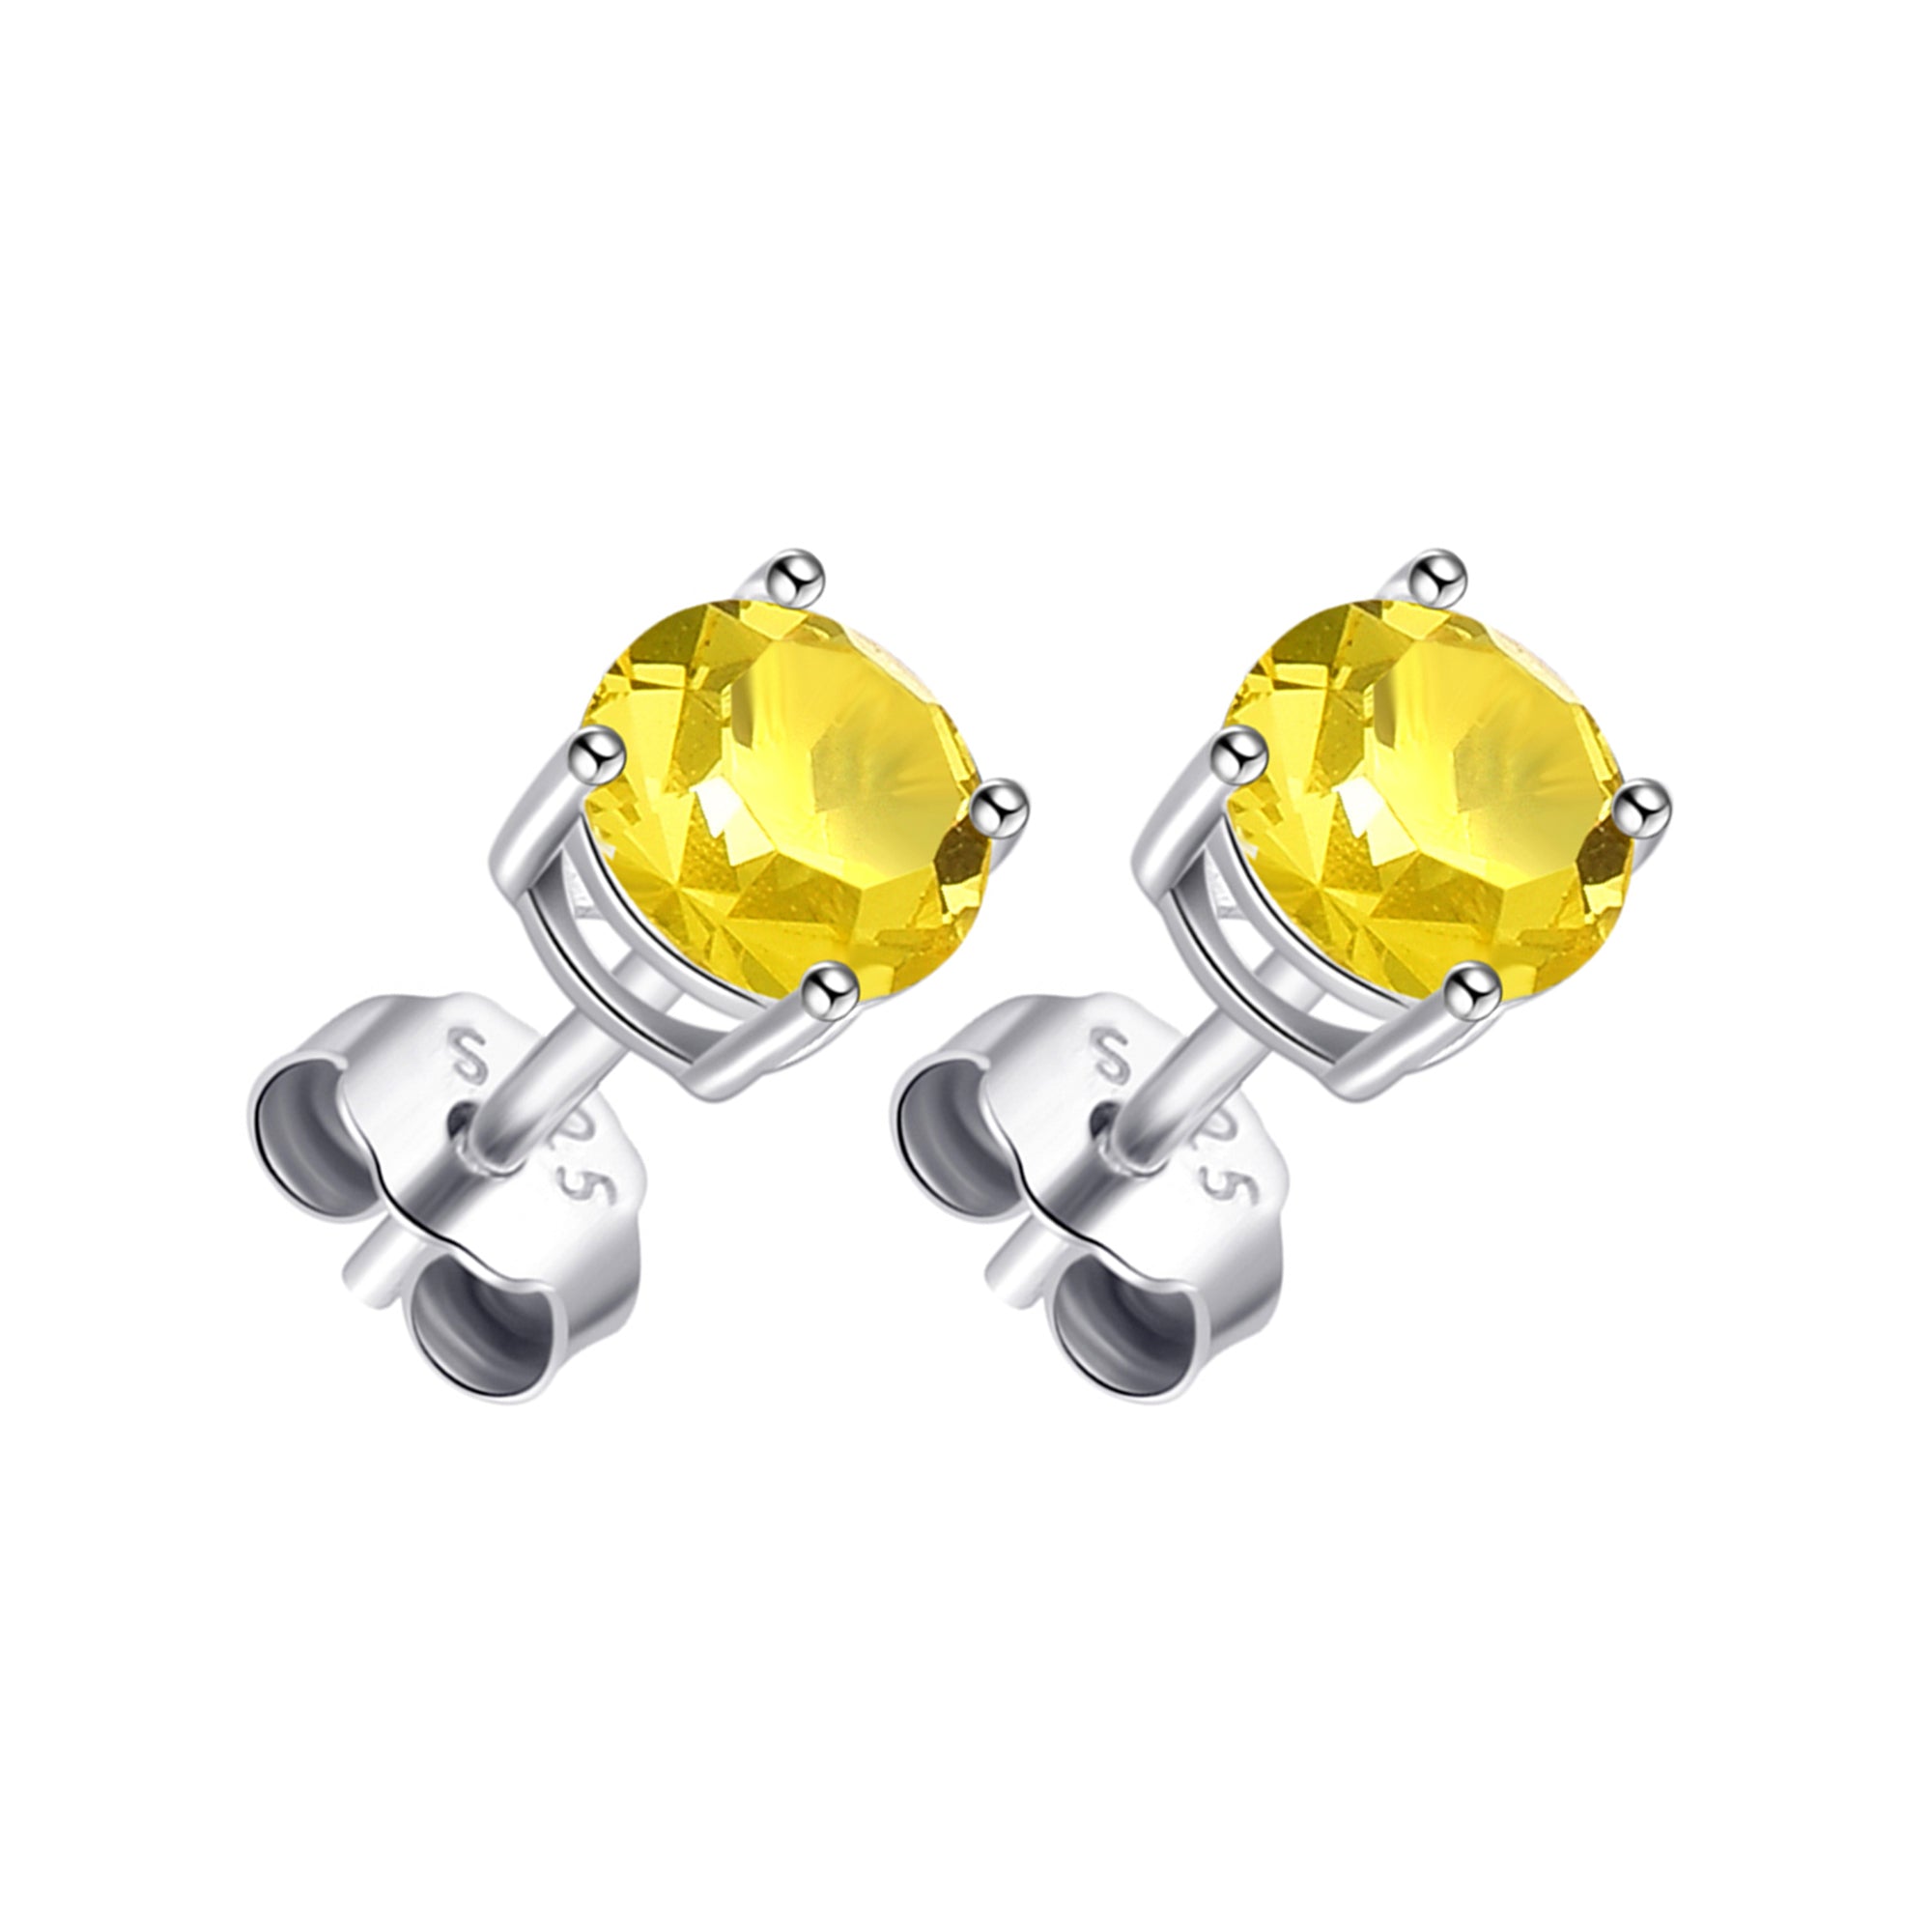 Sterling Silver Yellow Earrings Created with Zircondia® Crystals by Philip Jones Jewellery